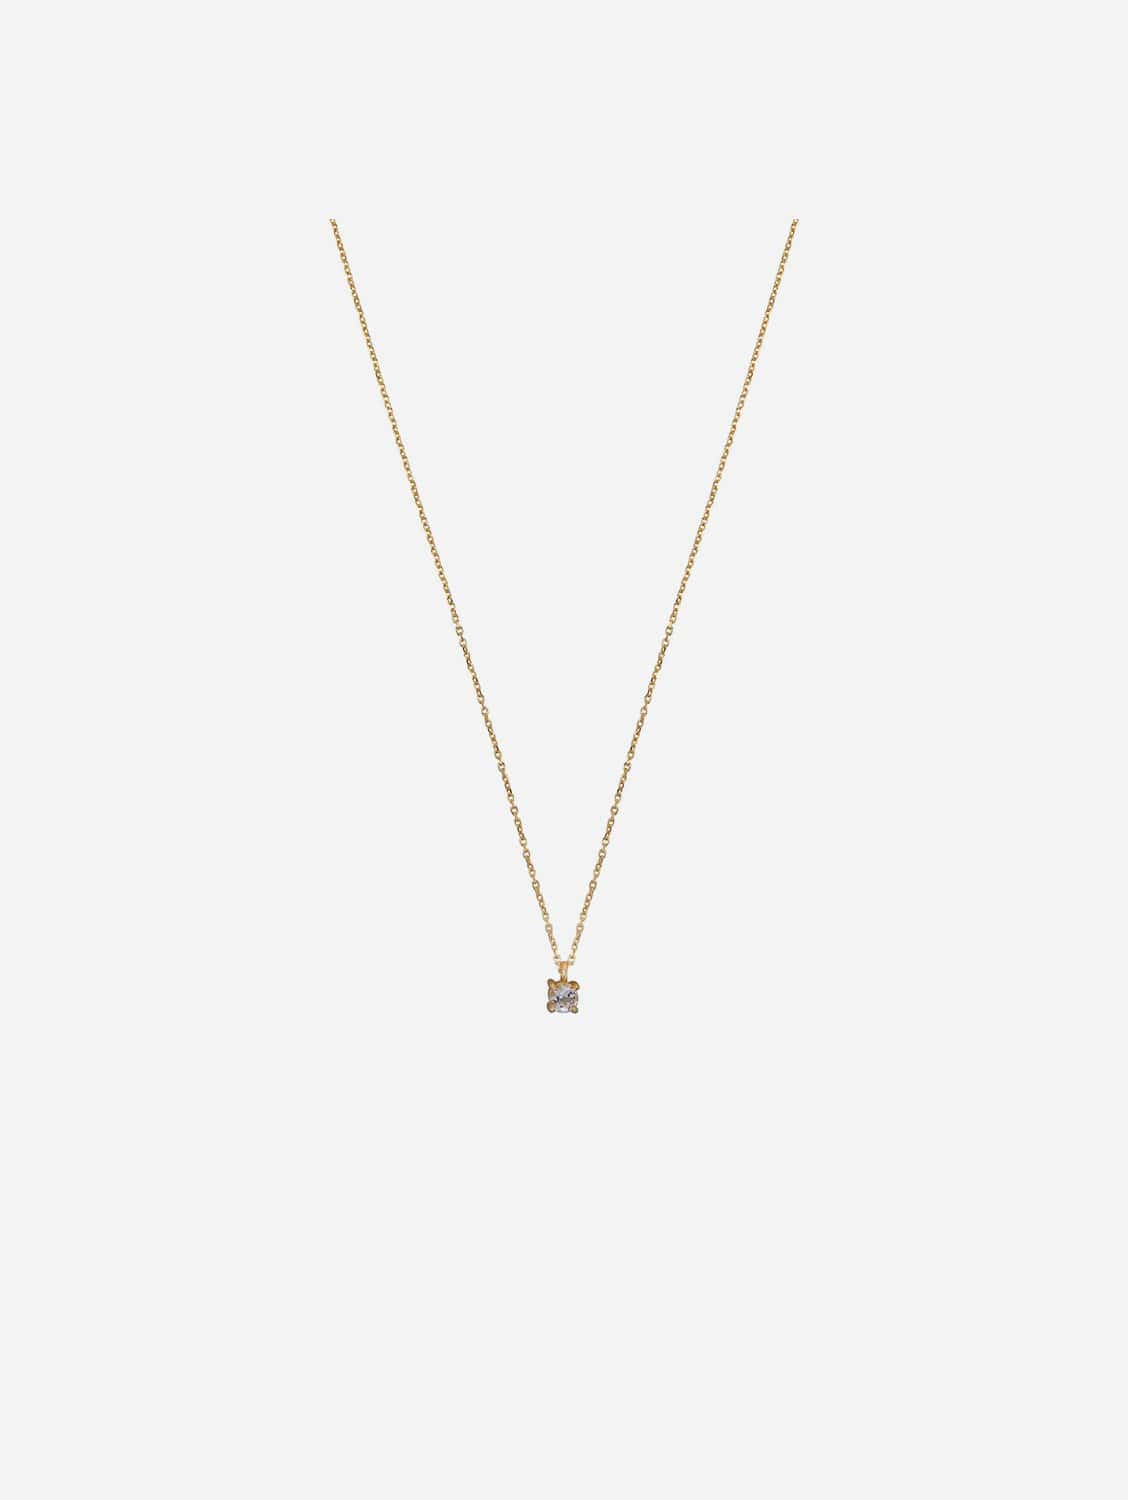 Ana Dyla Salma Recycled 925 Sterling Silver White Topaz Necklace | Gold Vermeil